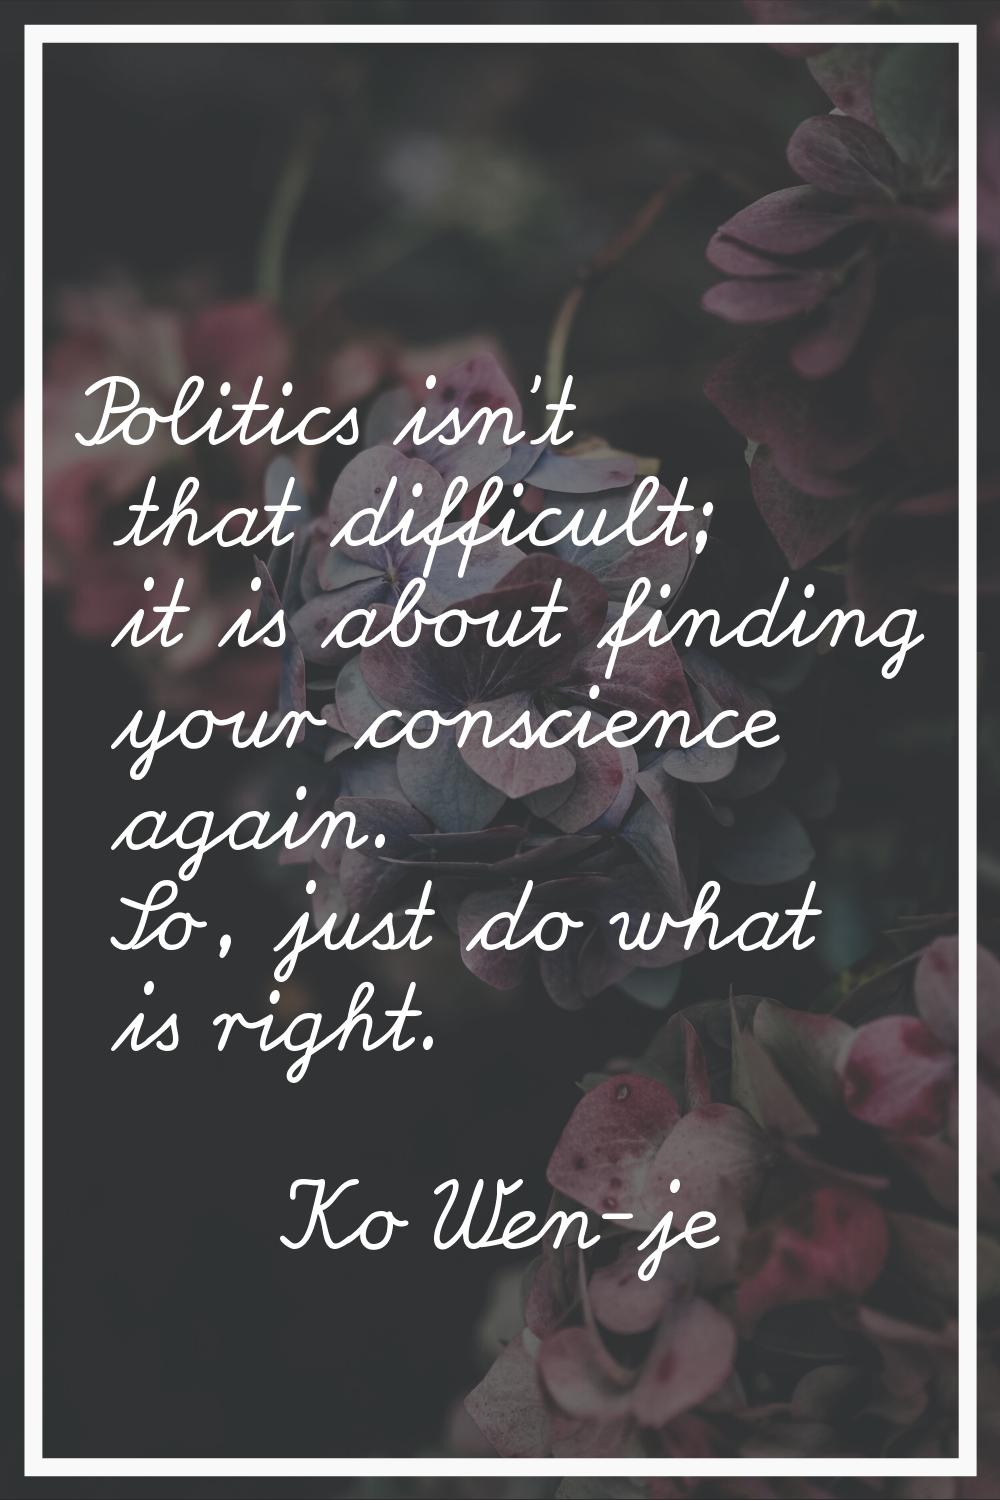 Politics isn't that difficult; it is about finding your conscience again. So, just do what is right